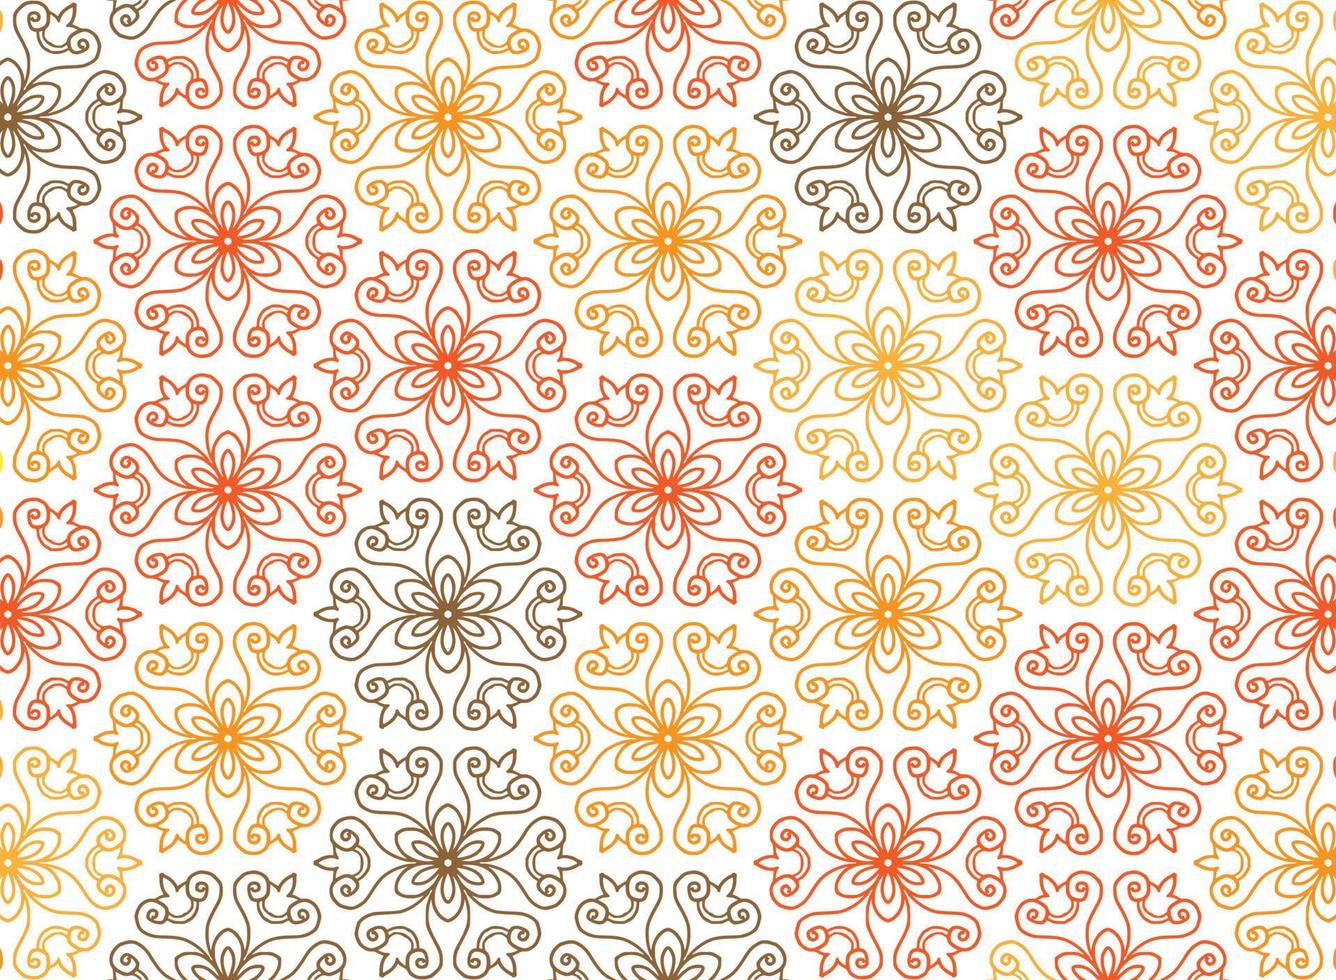 Ethnic colorful floral seamless pattern background vector